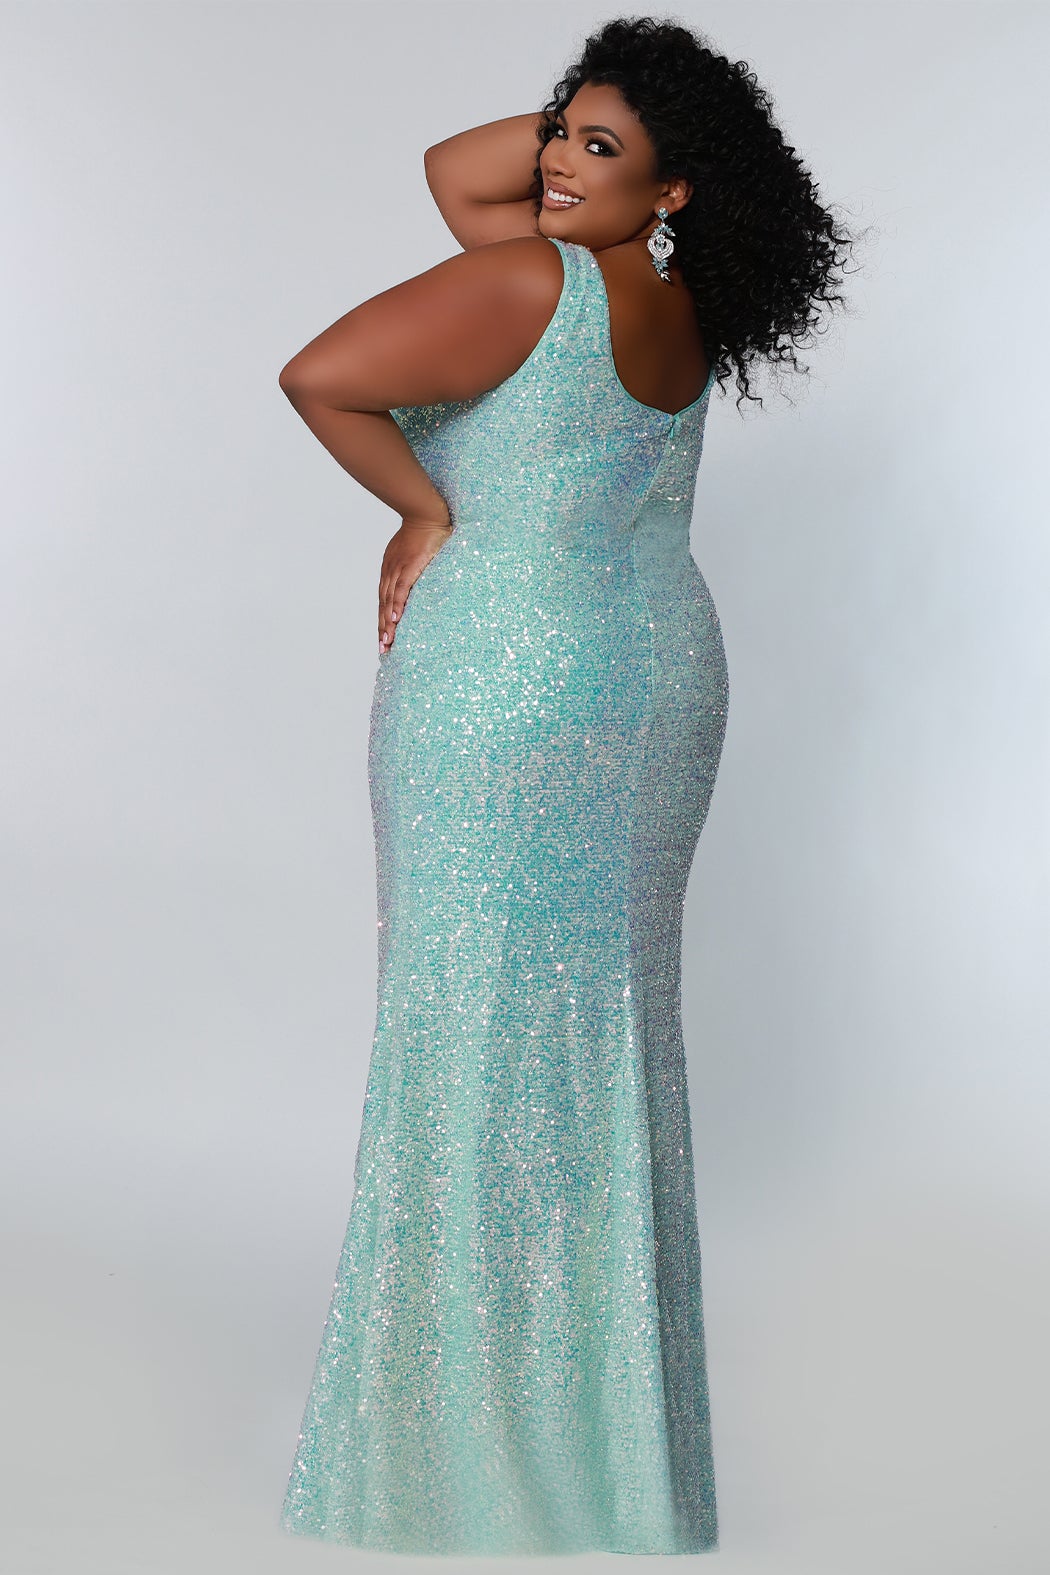 Tease Prom TE2201 Sydneys Closet Long Fitted Sequin Plus size prom dress slit  Colors: Aqua, Peach, Unicorn Size Availability: 14-28 Fitted silhouette V-neckline Pleated bodice Empire waistline Slit on right side of skirt 5 inch sweep train Bra-friendly straps Invisible zipper Scoop back Multi-dimensional sequins Stretch knit lining